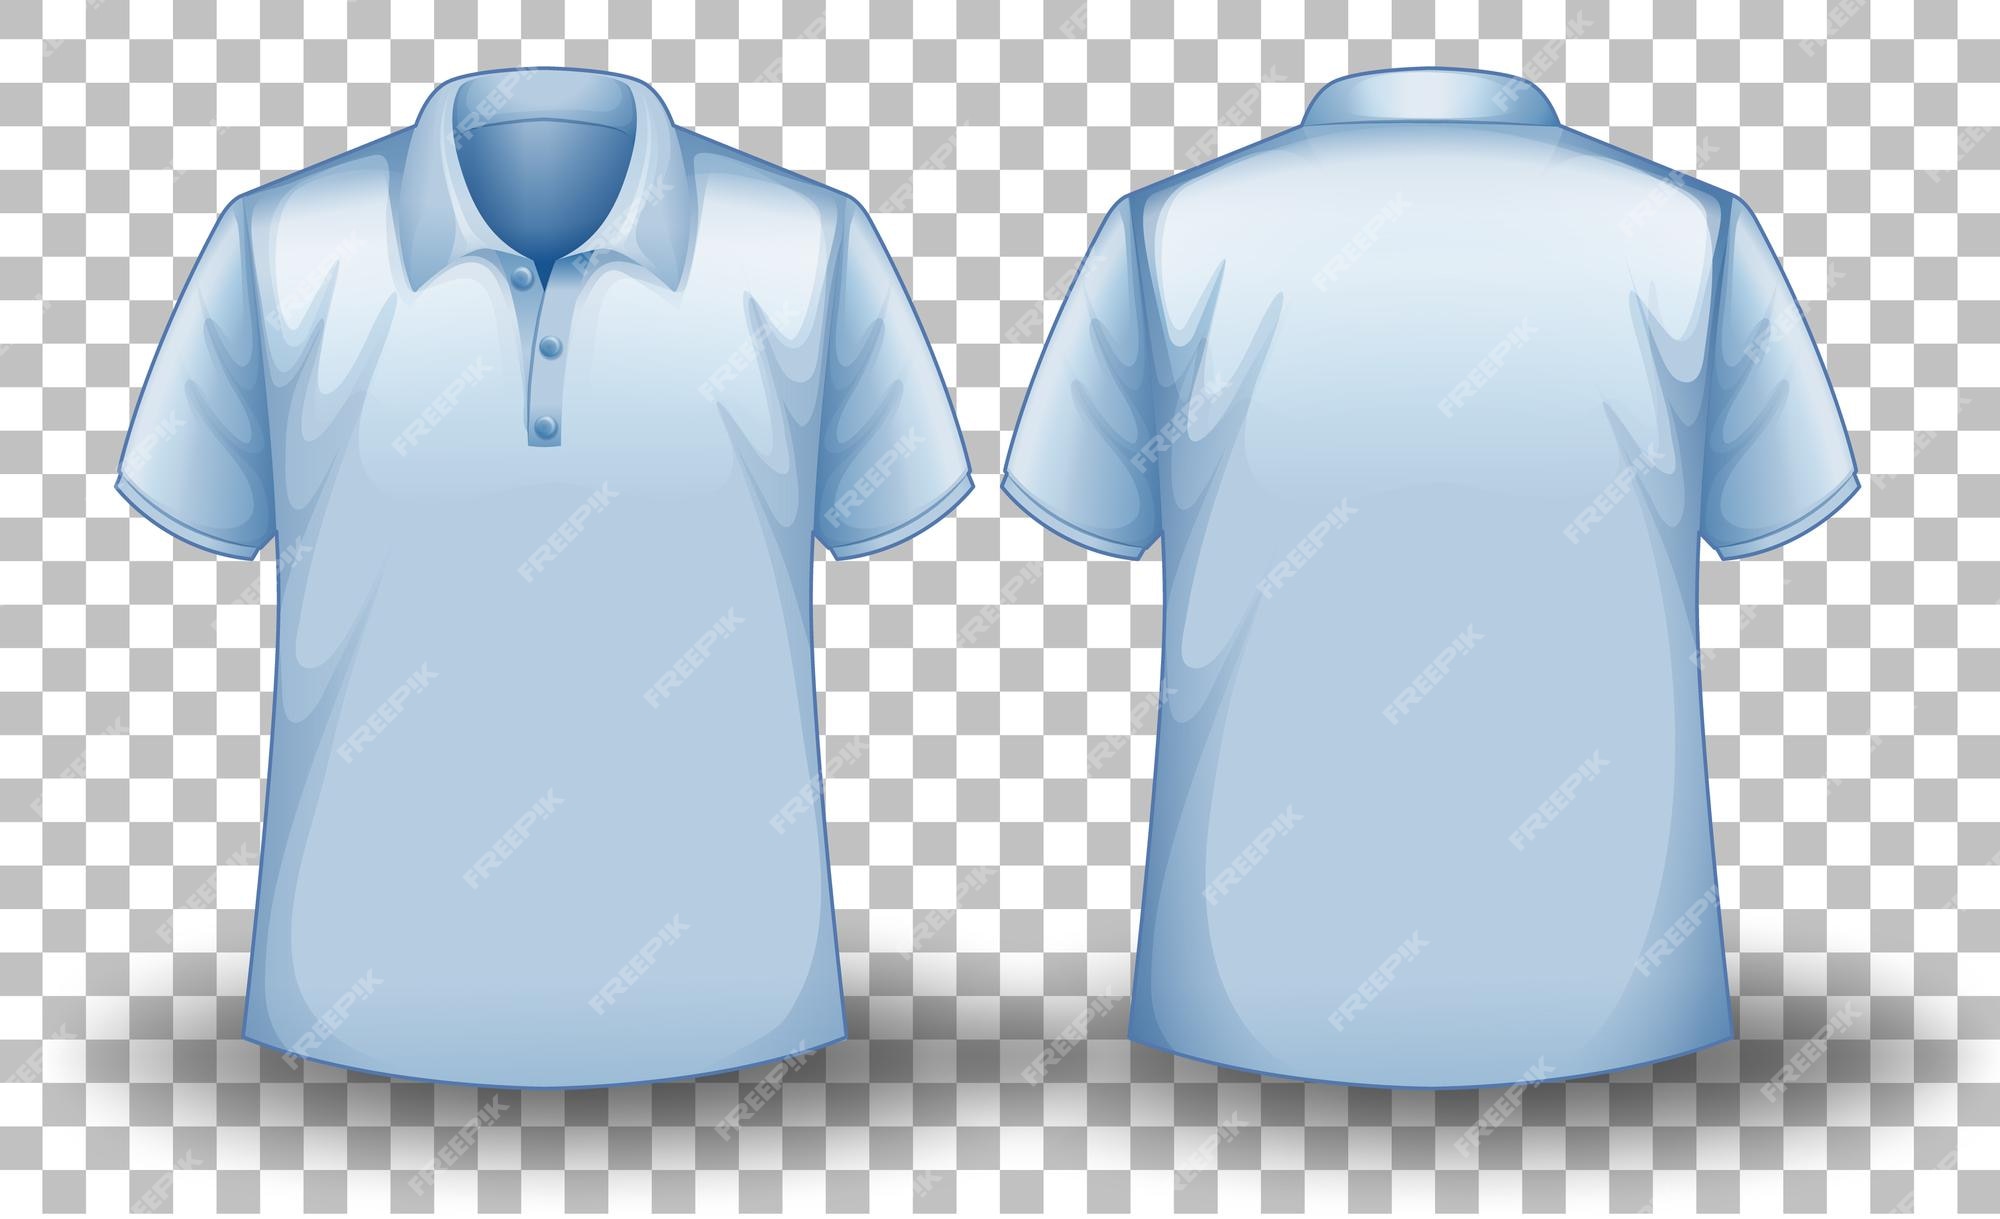 Predictor Strictly Departure Camisa polo Vectors & Illustrations for Free Download | Freepik